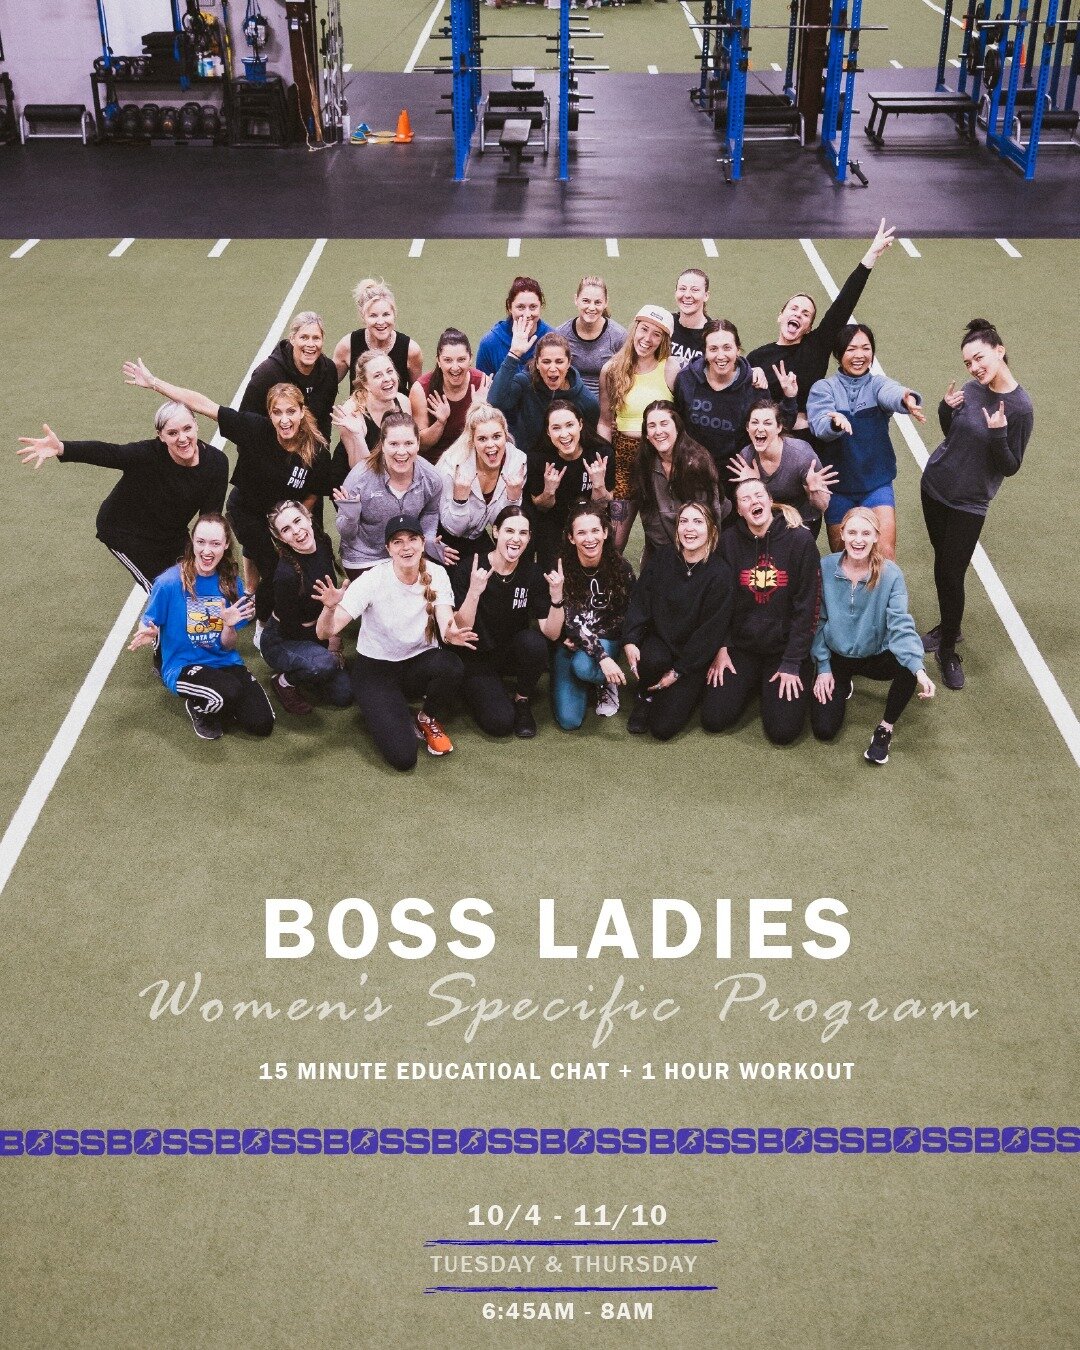 BOSS LADIES!!!

We are super excited to announce our &quot;Women's Specific Program&quot; running from October 4th - November 10th every Tuesday and Thursday from 6:45am - 8:00am!

Each session will include a 1 hour workout created just for women + a